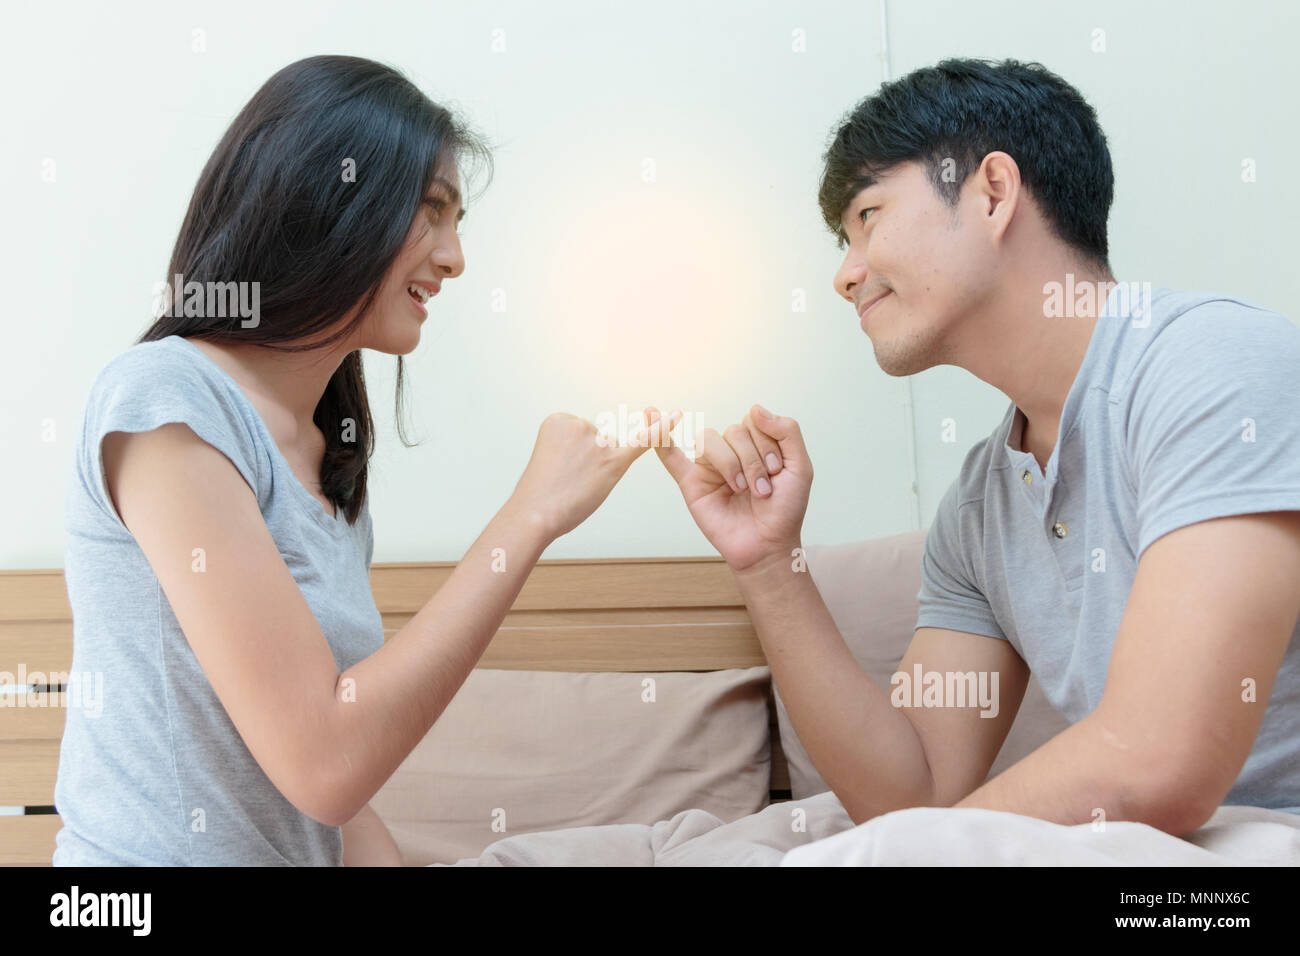 Couple relationship concepts, asian man trying to reconcile with his girlfriend after have an argument. Stock Photo